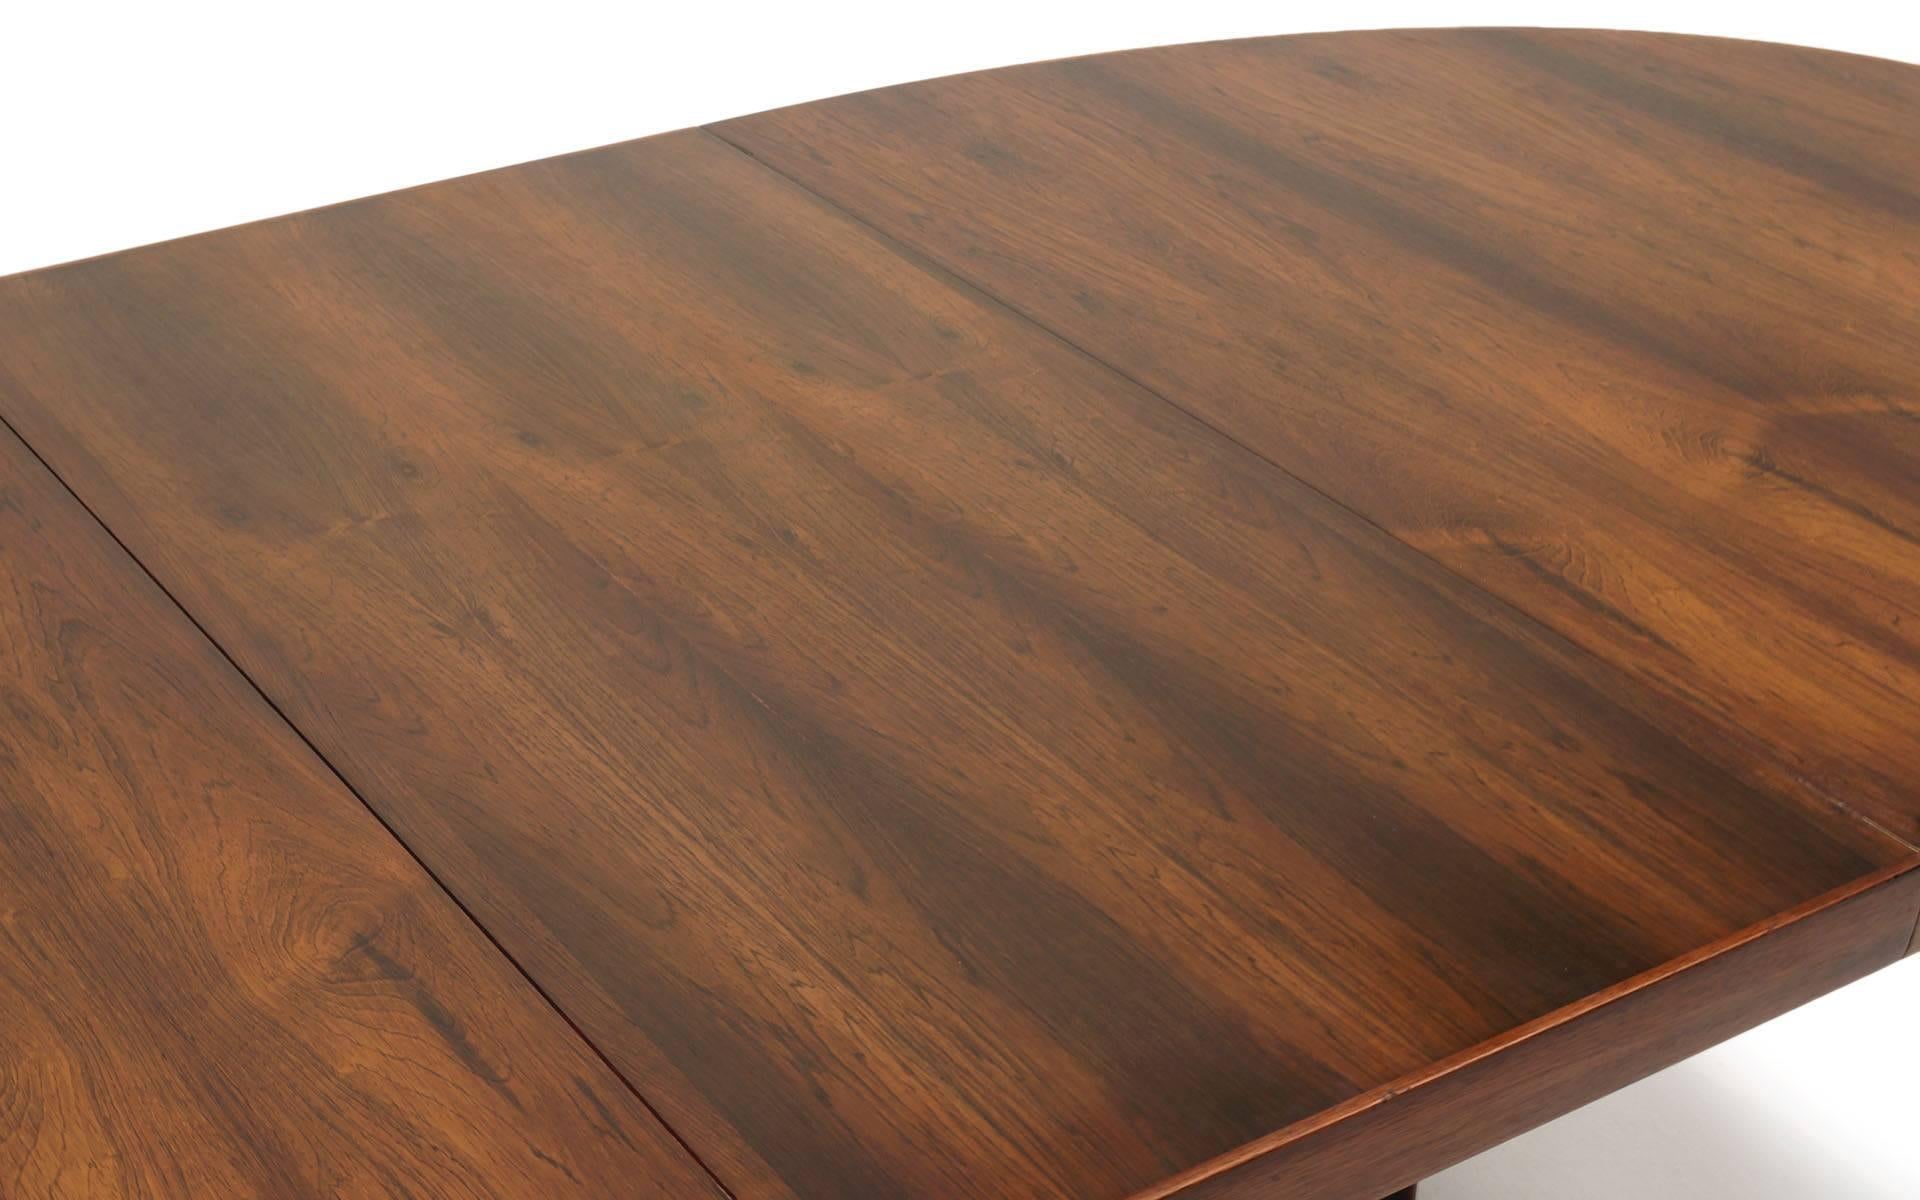 Mid-20th Century Danish Modern Rosewood Dining Table with Leaf, Excellent Condition